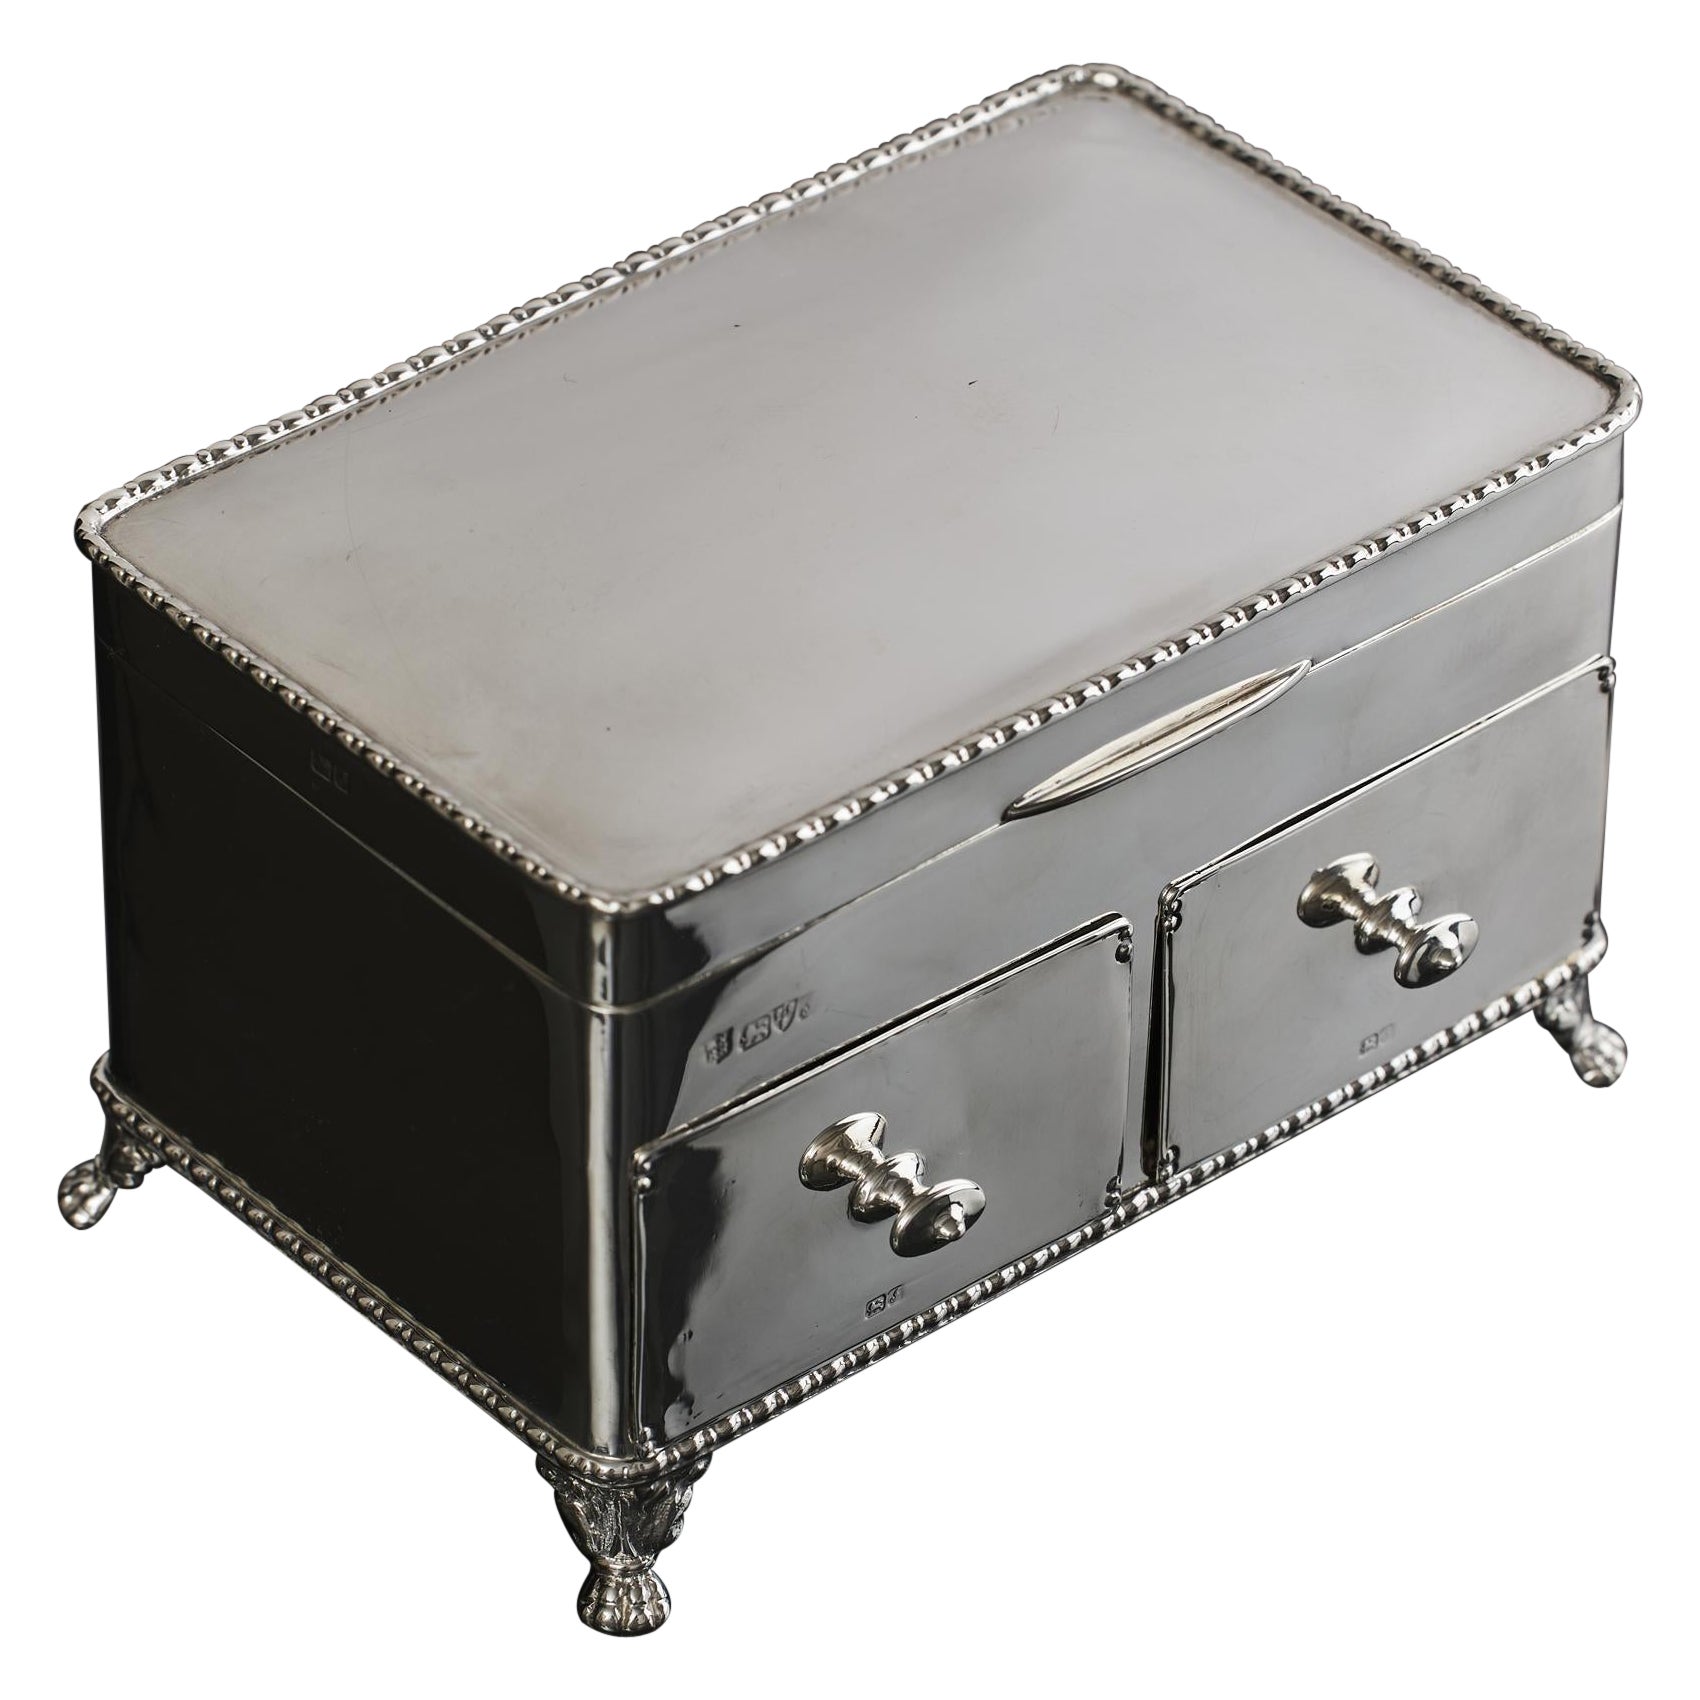 Handmade Edwardian silver jewellery box with drawers For Sale